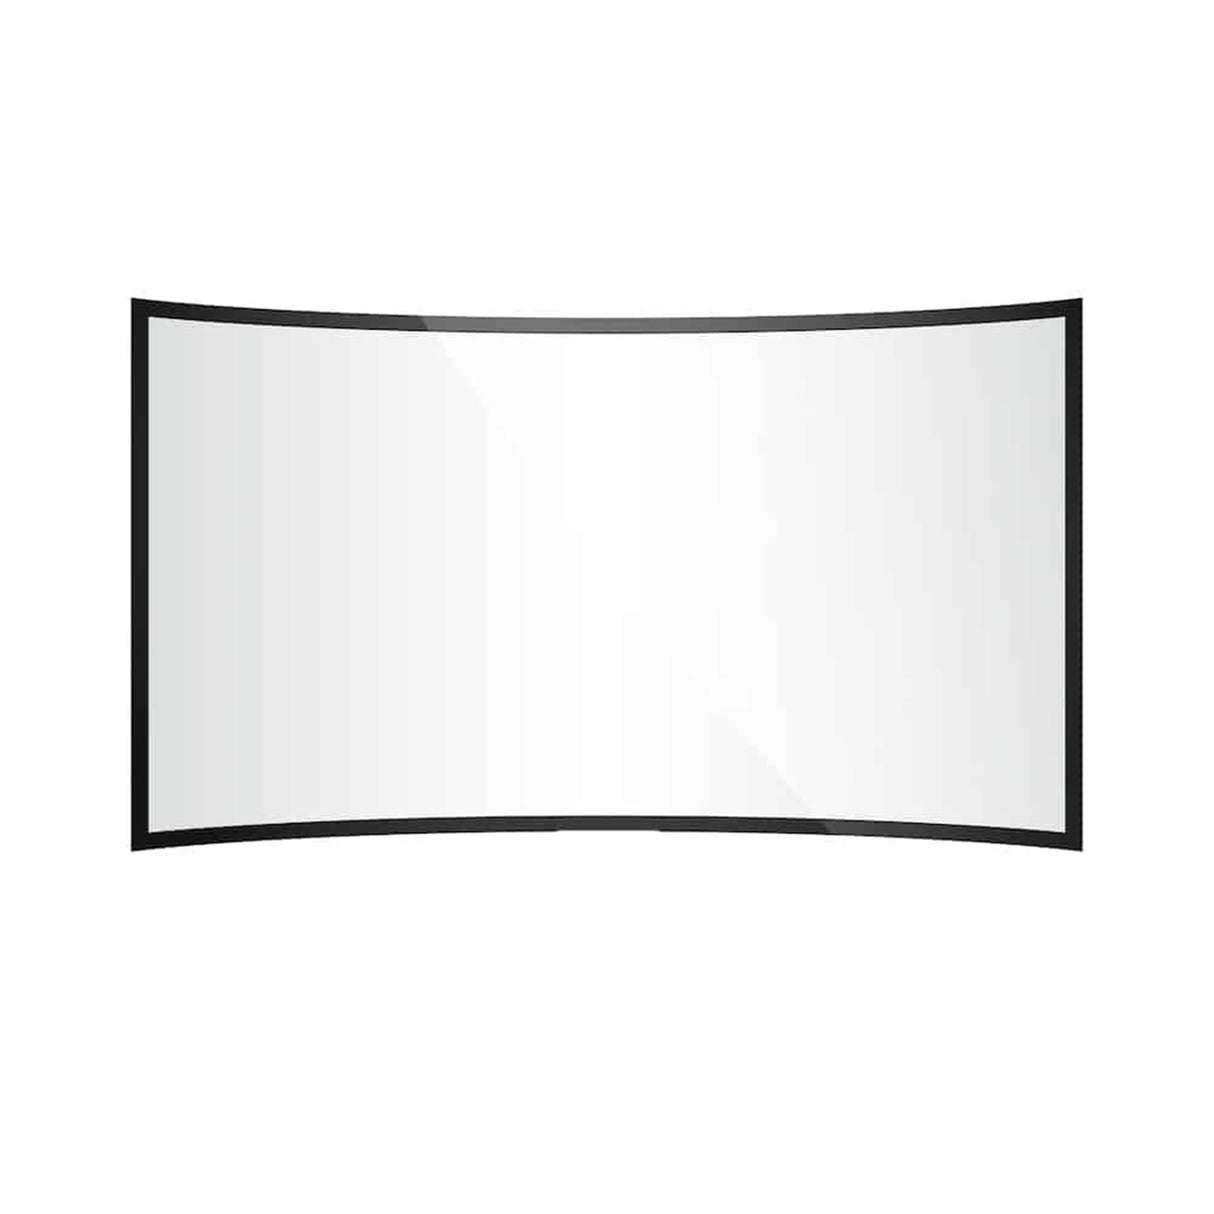 RNT Screen SableFrame Fixed Frame Curve Projection Screen 150'' (16:9) (Matte White)